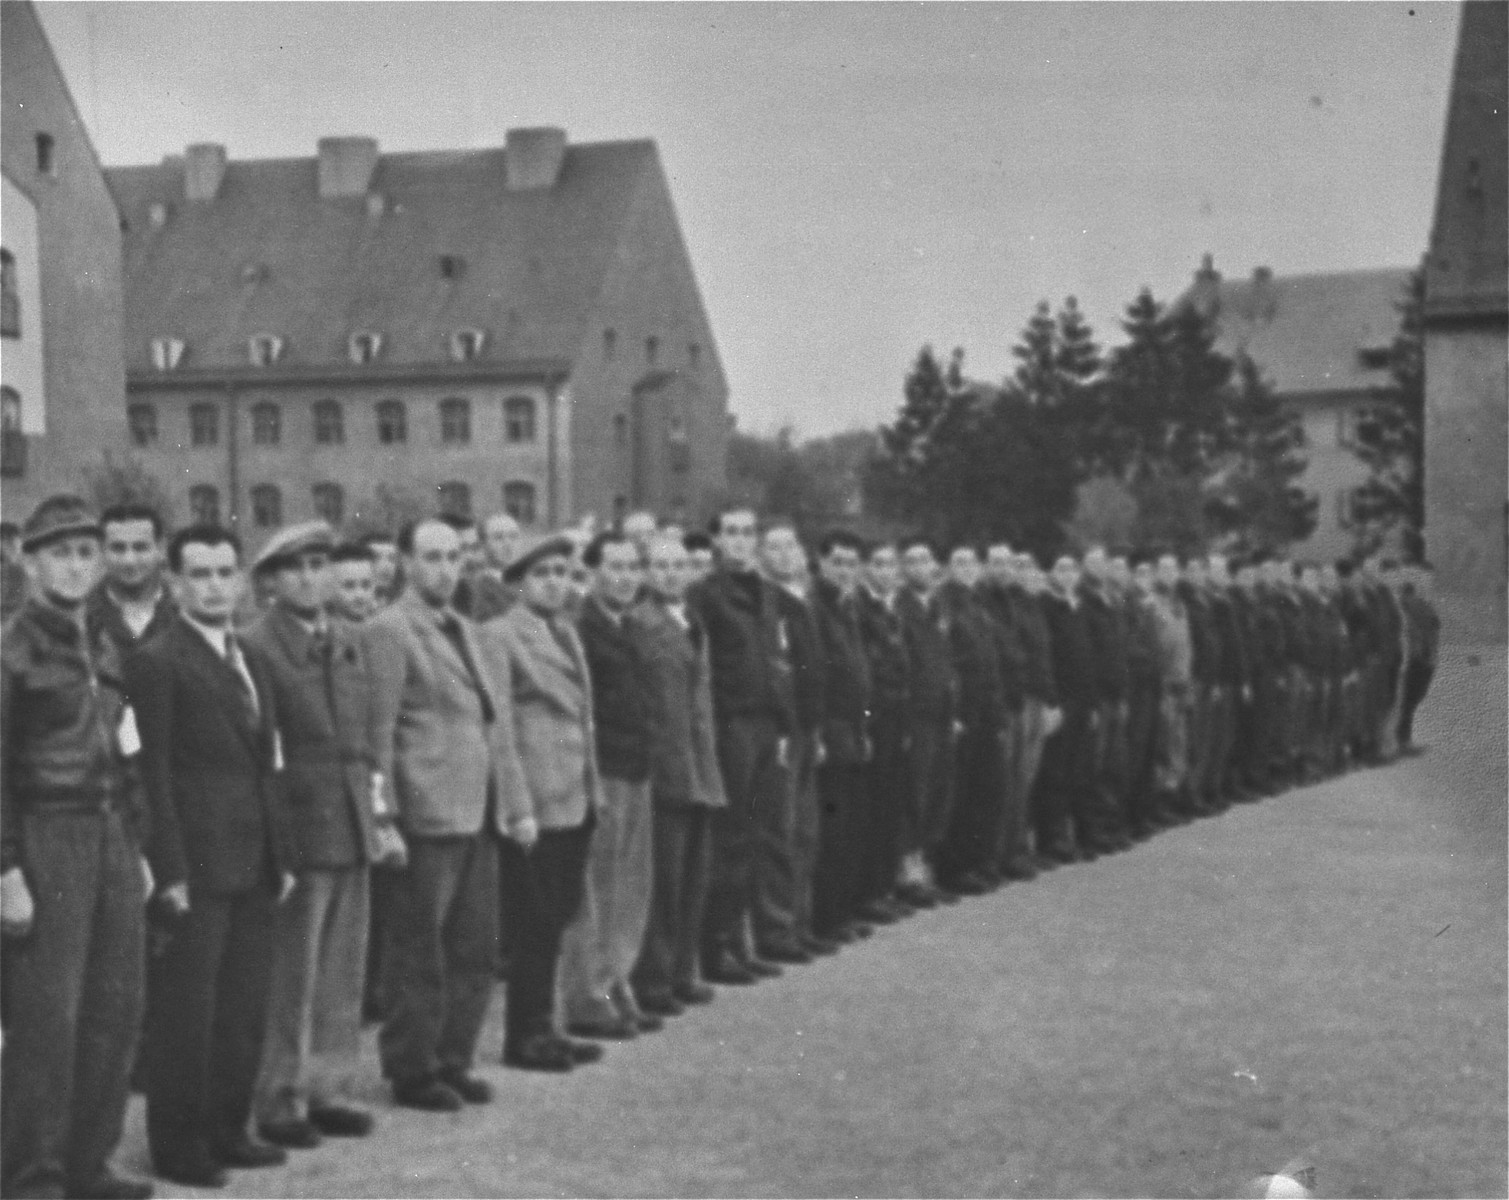 Members of the Jewish police force at the Landsberg displaced persons' camp line up in the main square of the camp. [Oversized print]